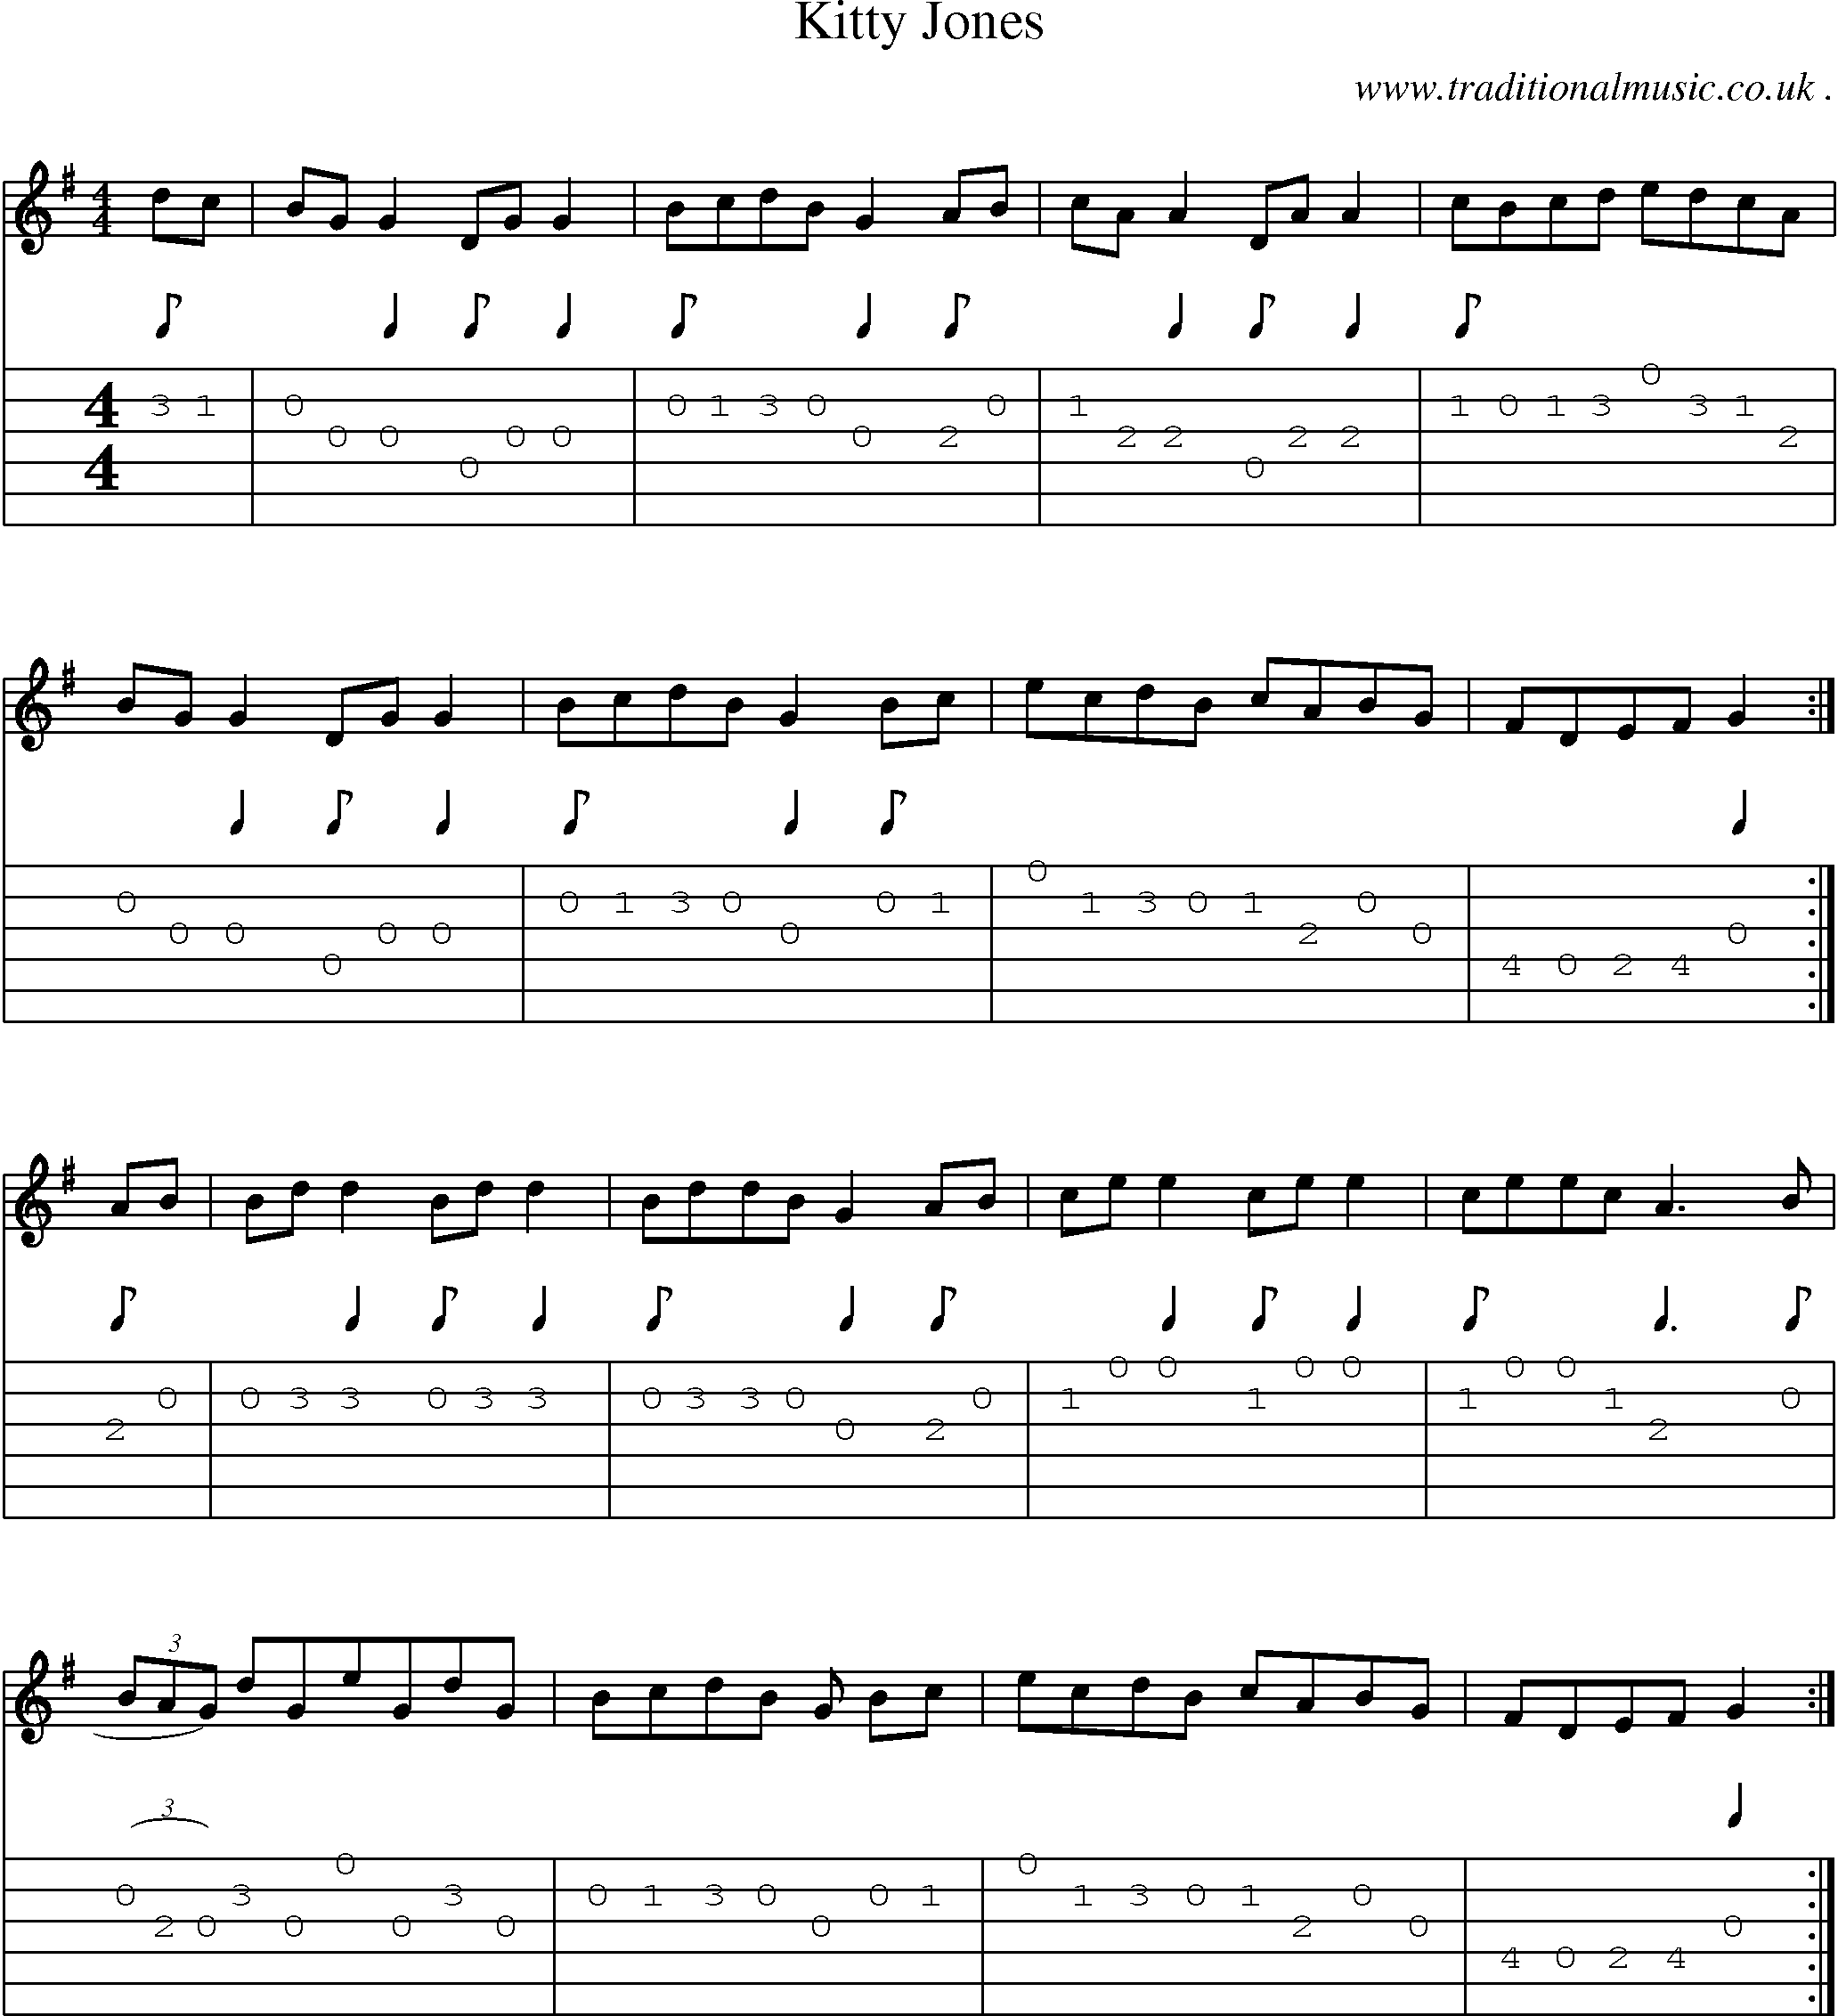 Sheet-Music and Guitar Tabs for Kitty Jones